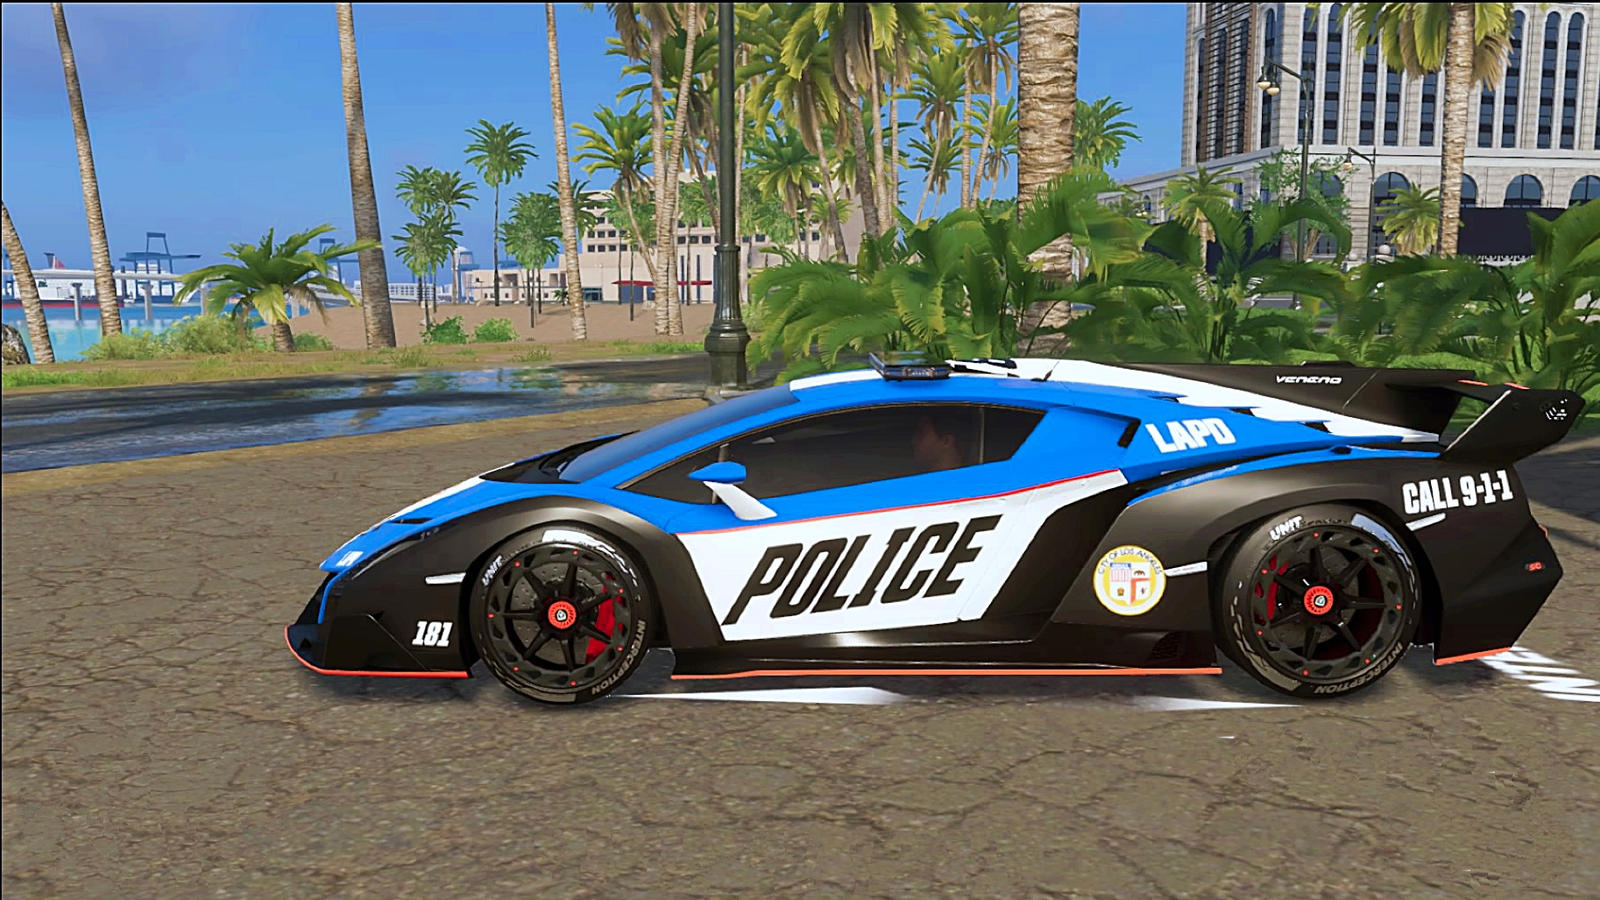 The Crew 2 Police Livery For My Lamborghini Veneno By Whendt On Deviantart